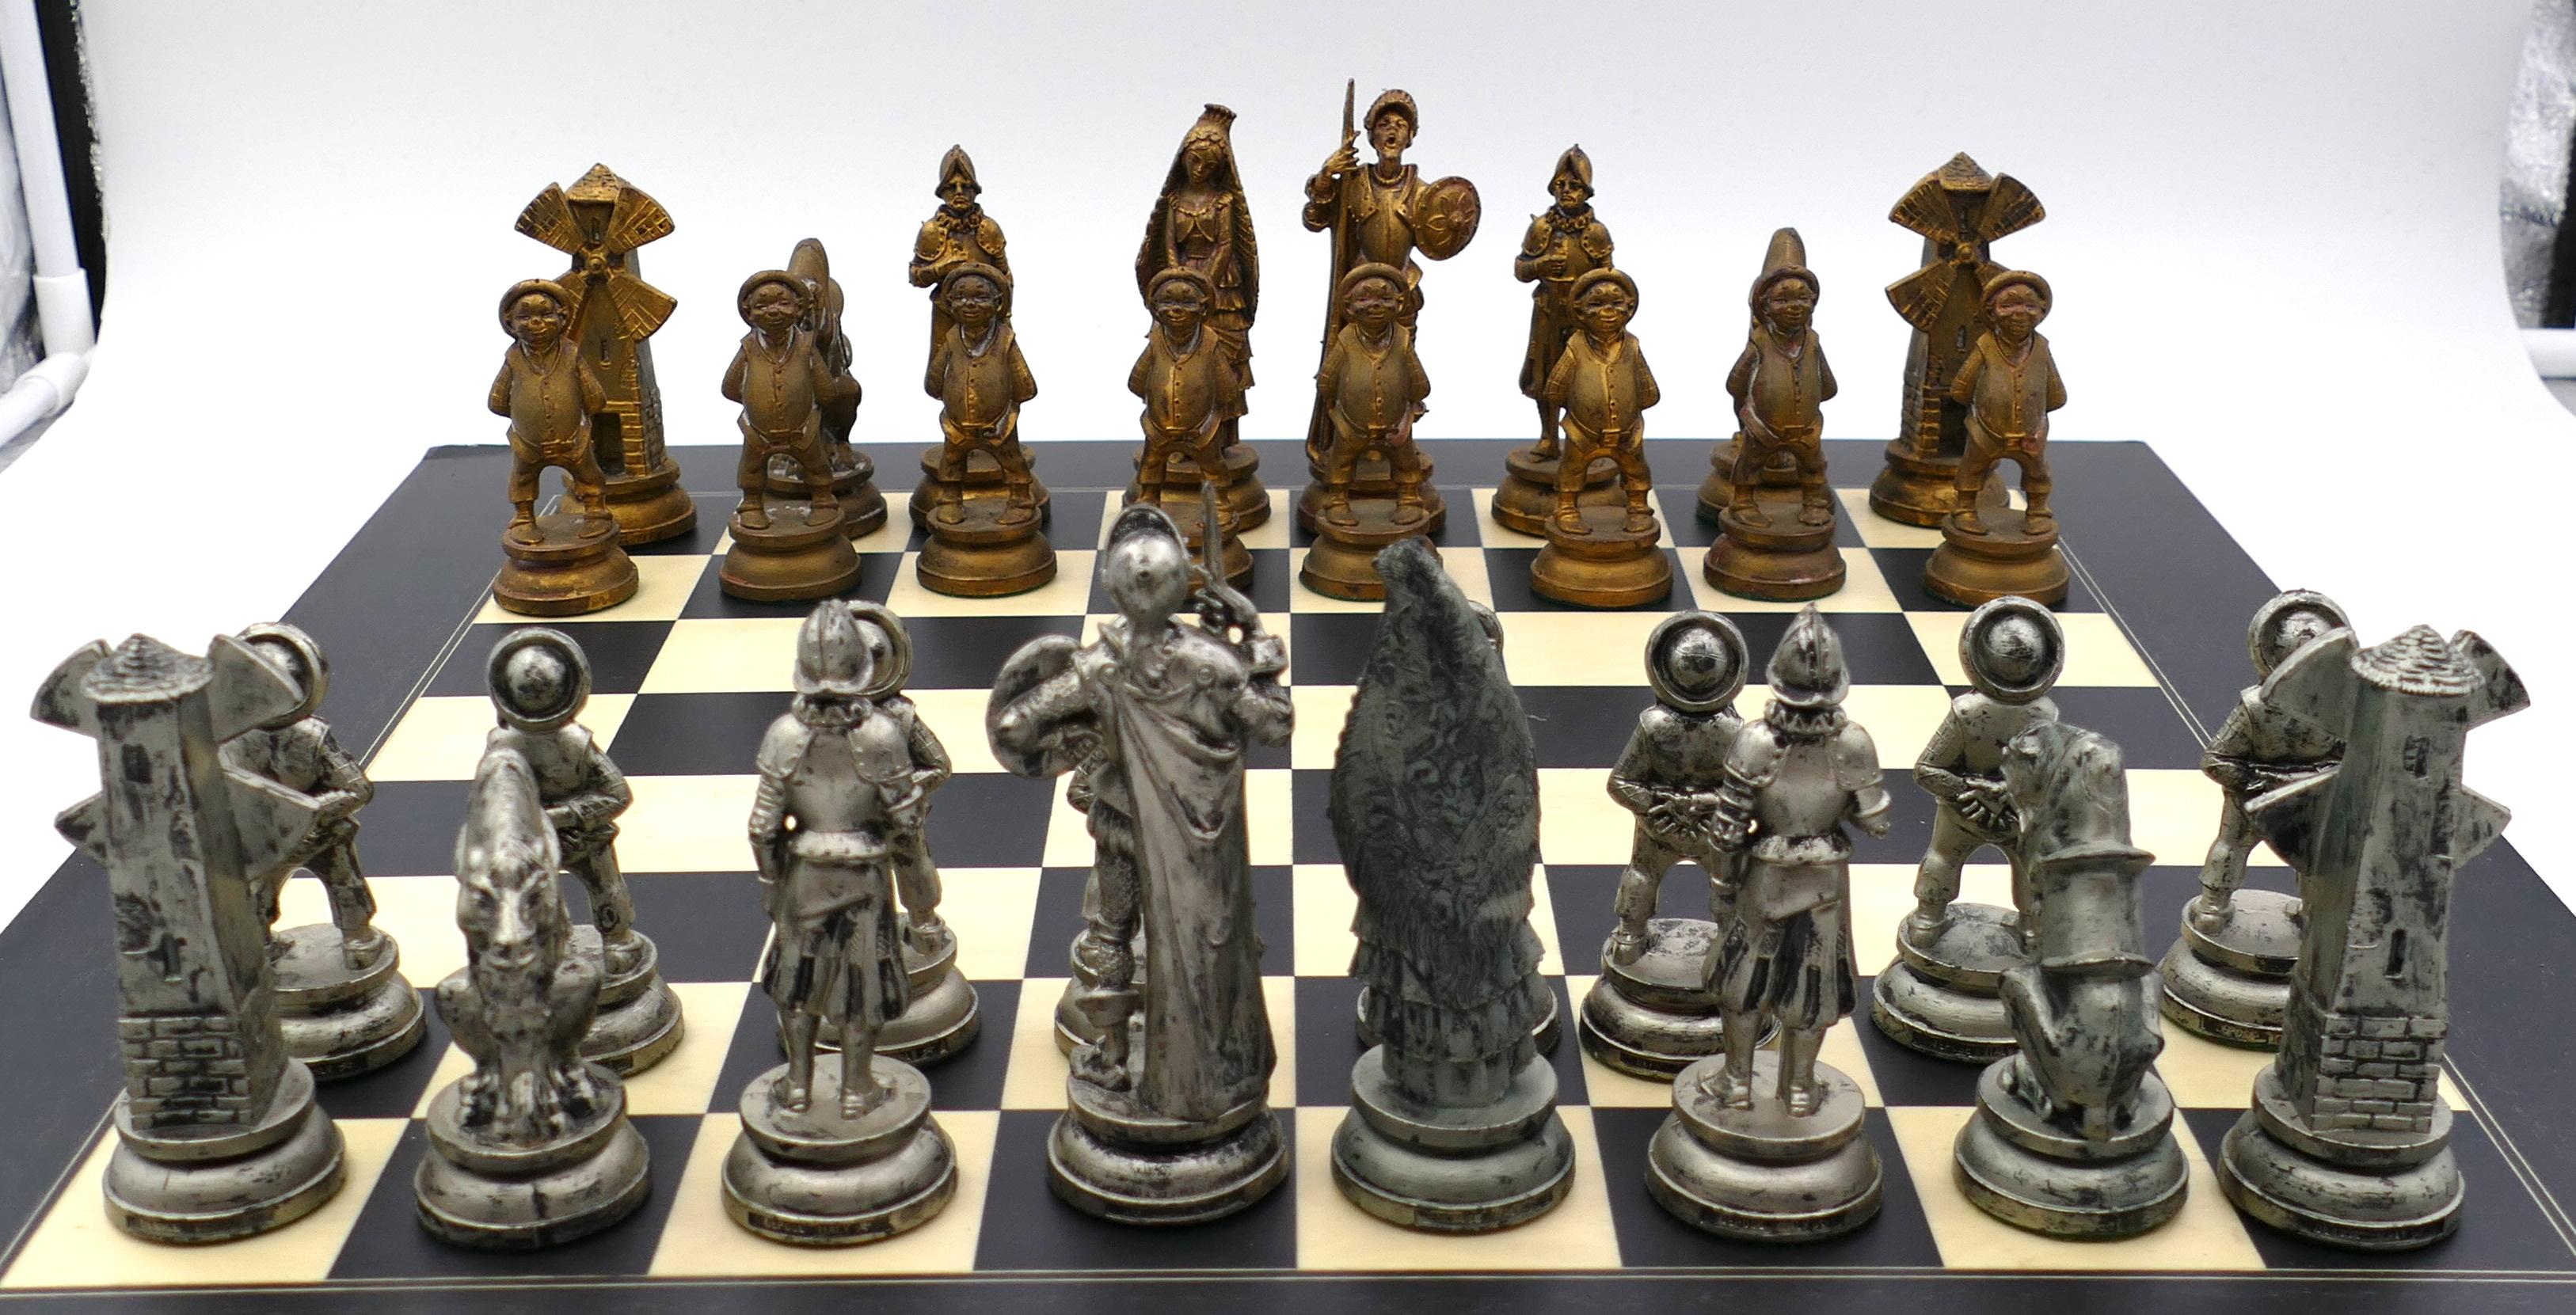 This Don Quixote chess is a chess set inspired by the famous novel The Ingenious Gentleman Don Quixote of La Mancha written by Miguel de Cervantes.

The set consists of plastic and metal colored characters, and a fine wooden chessboard.
Every